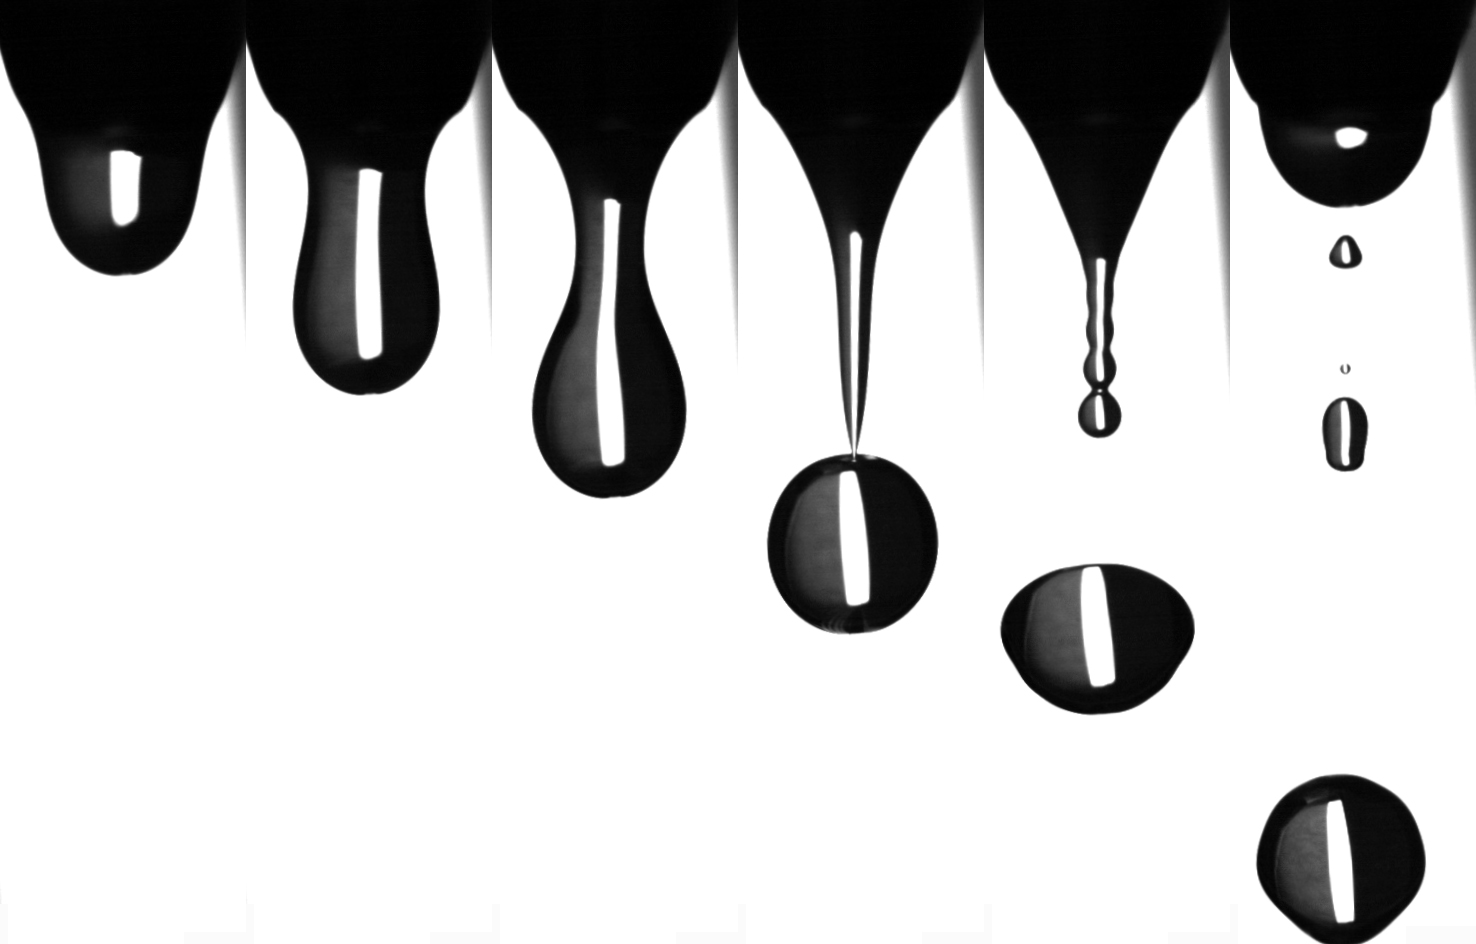 Time sequence images during the dripping of a water droplet from a laboratory tap showing pendant droplet formation, extension, pinch-off, recoil and thread breakup.
